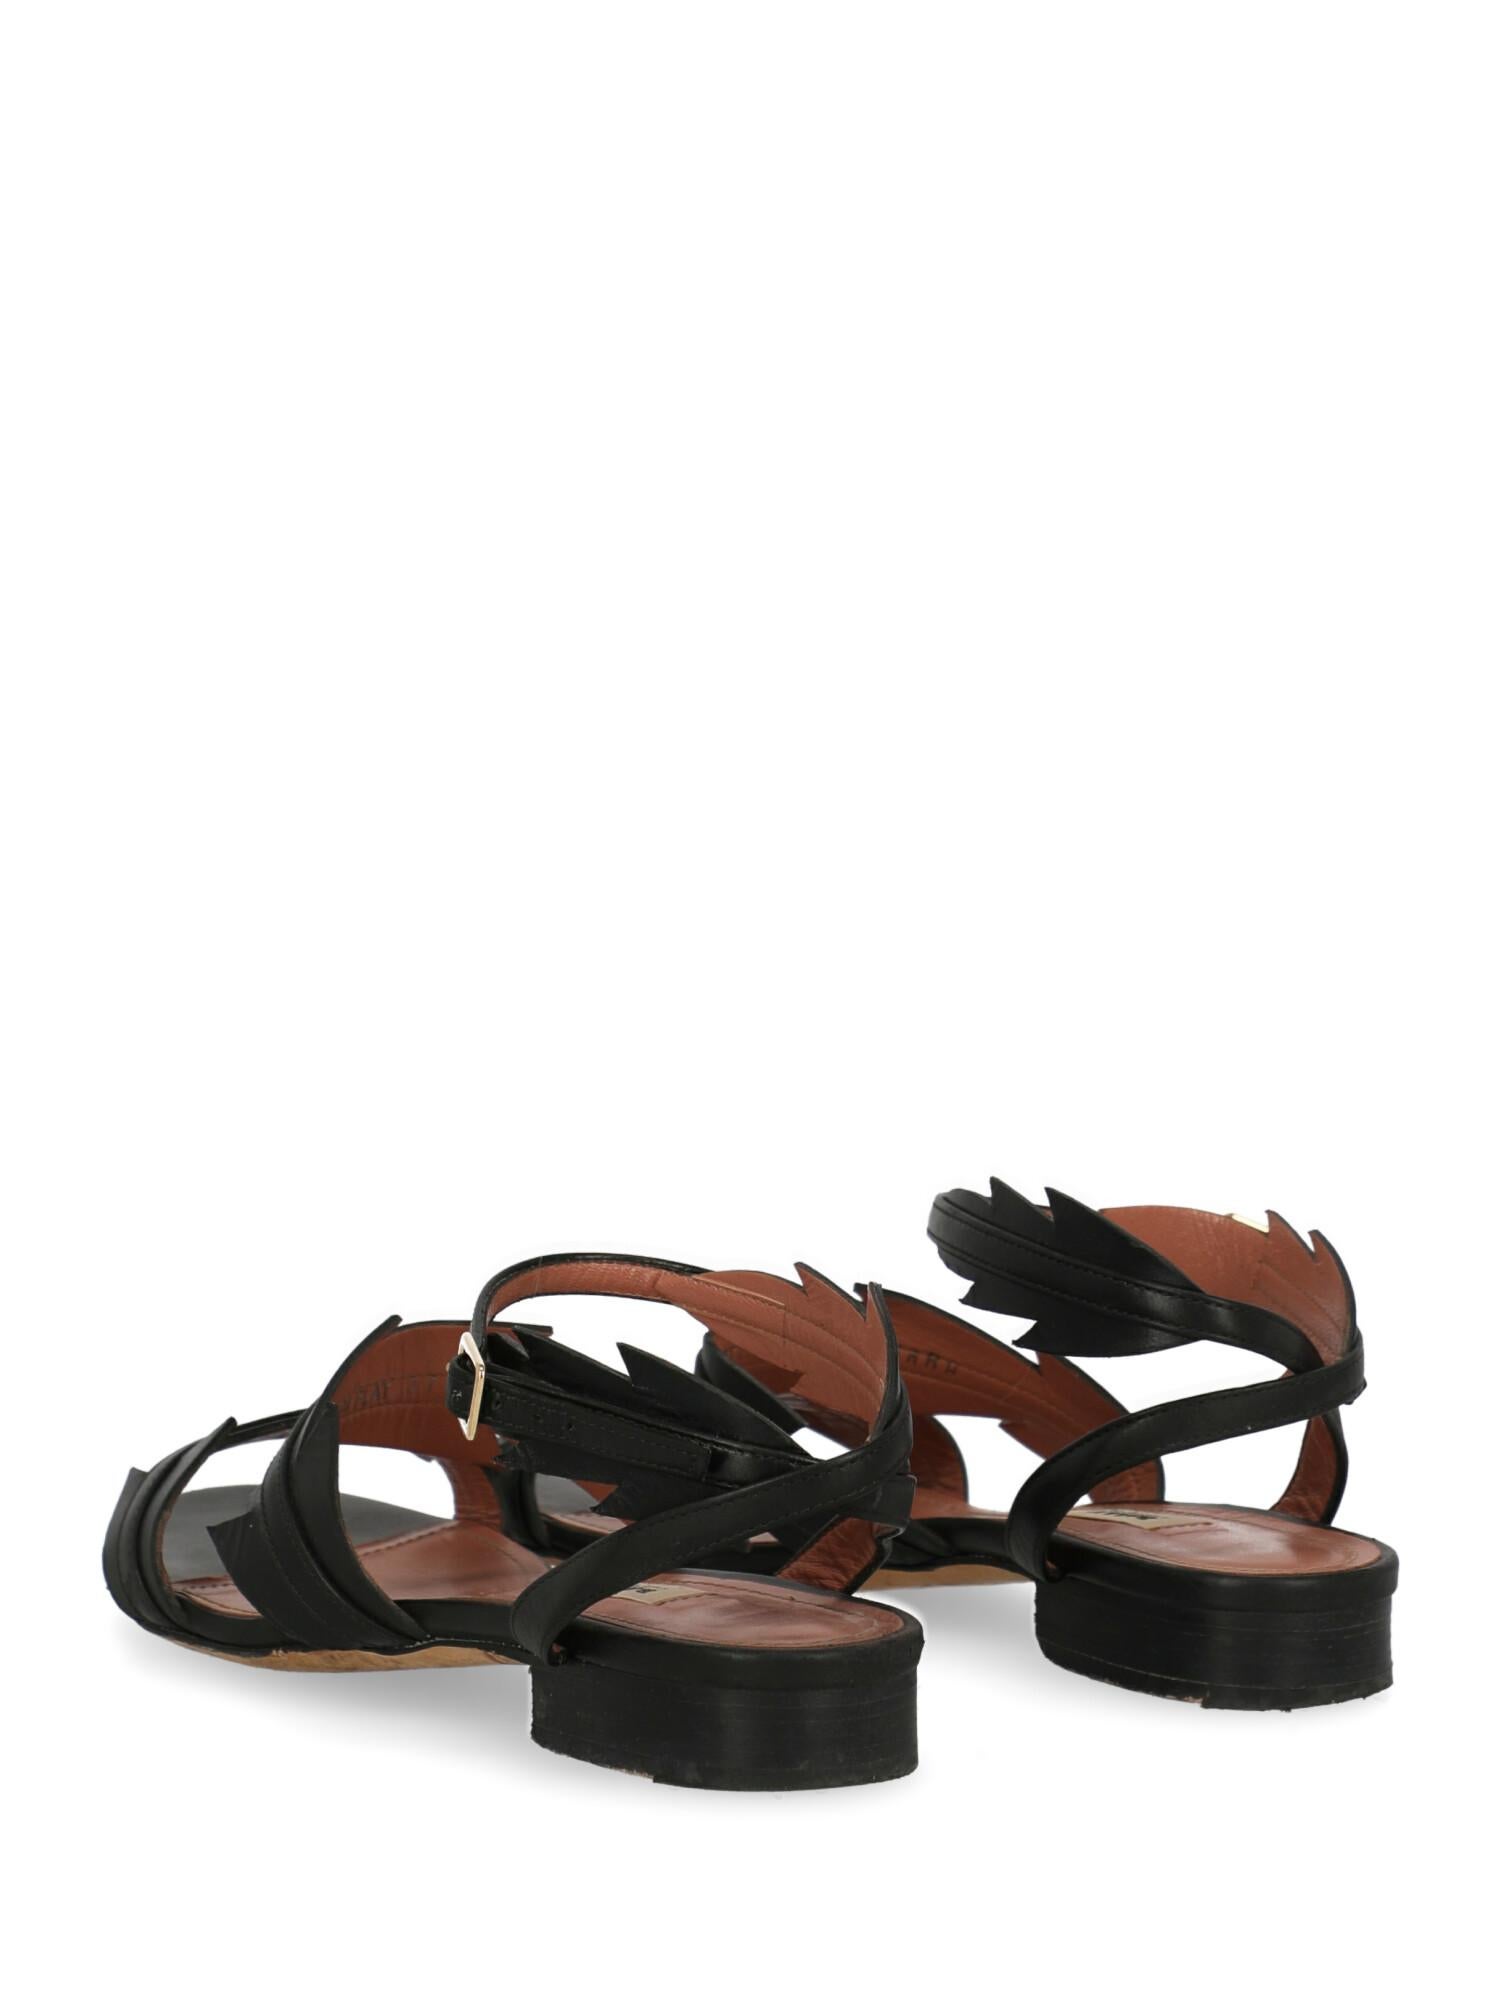 Bally Woman Sandals Black EU 37 In Fair Condition For Sale In Milan, IT